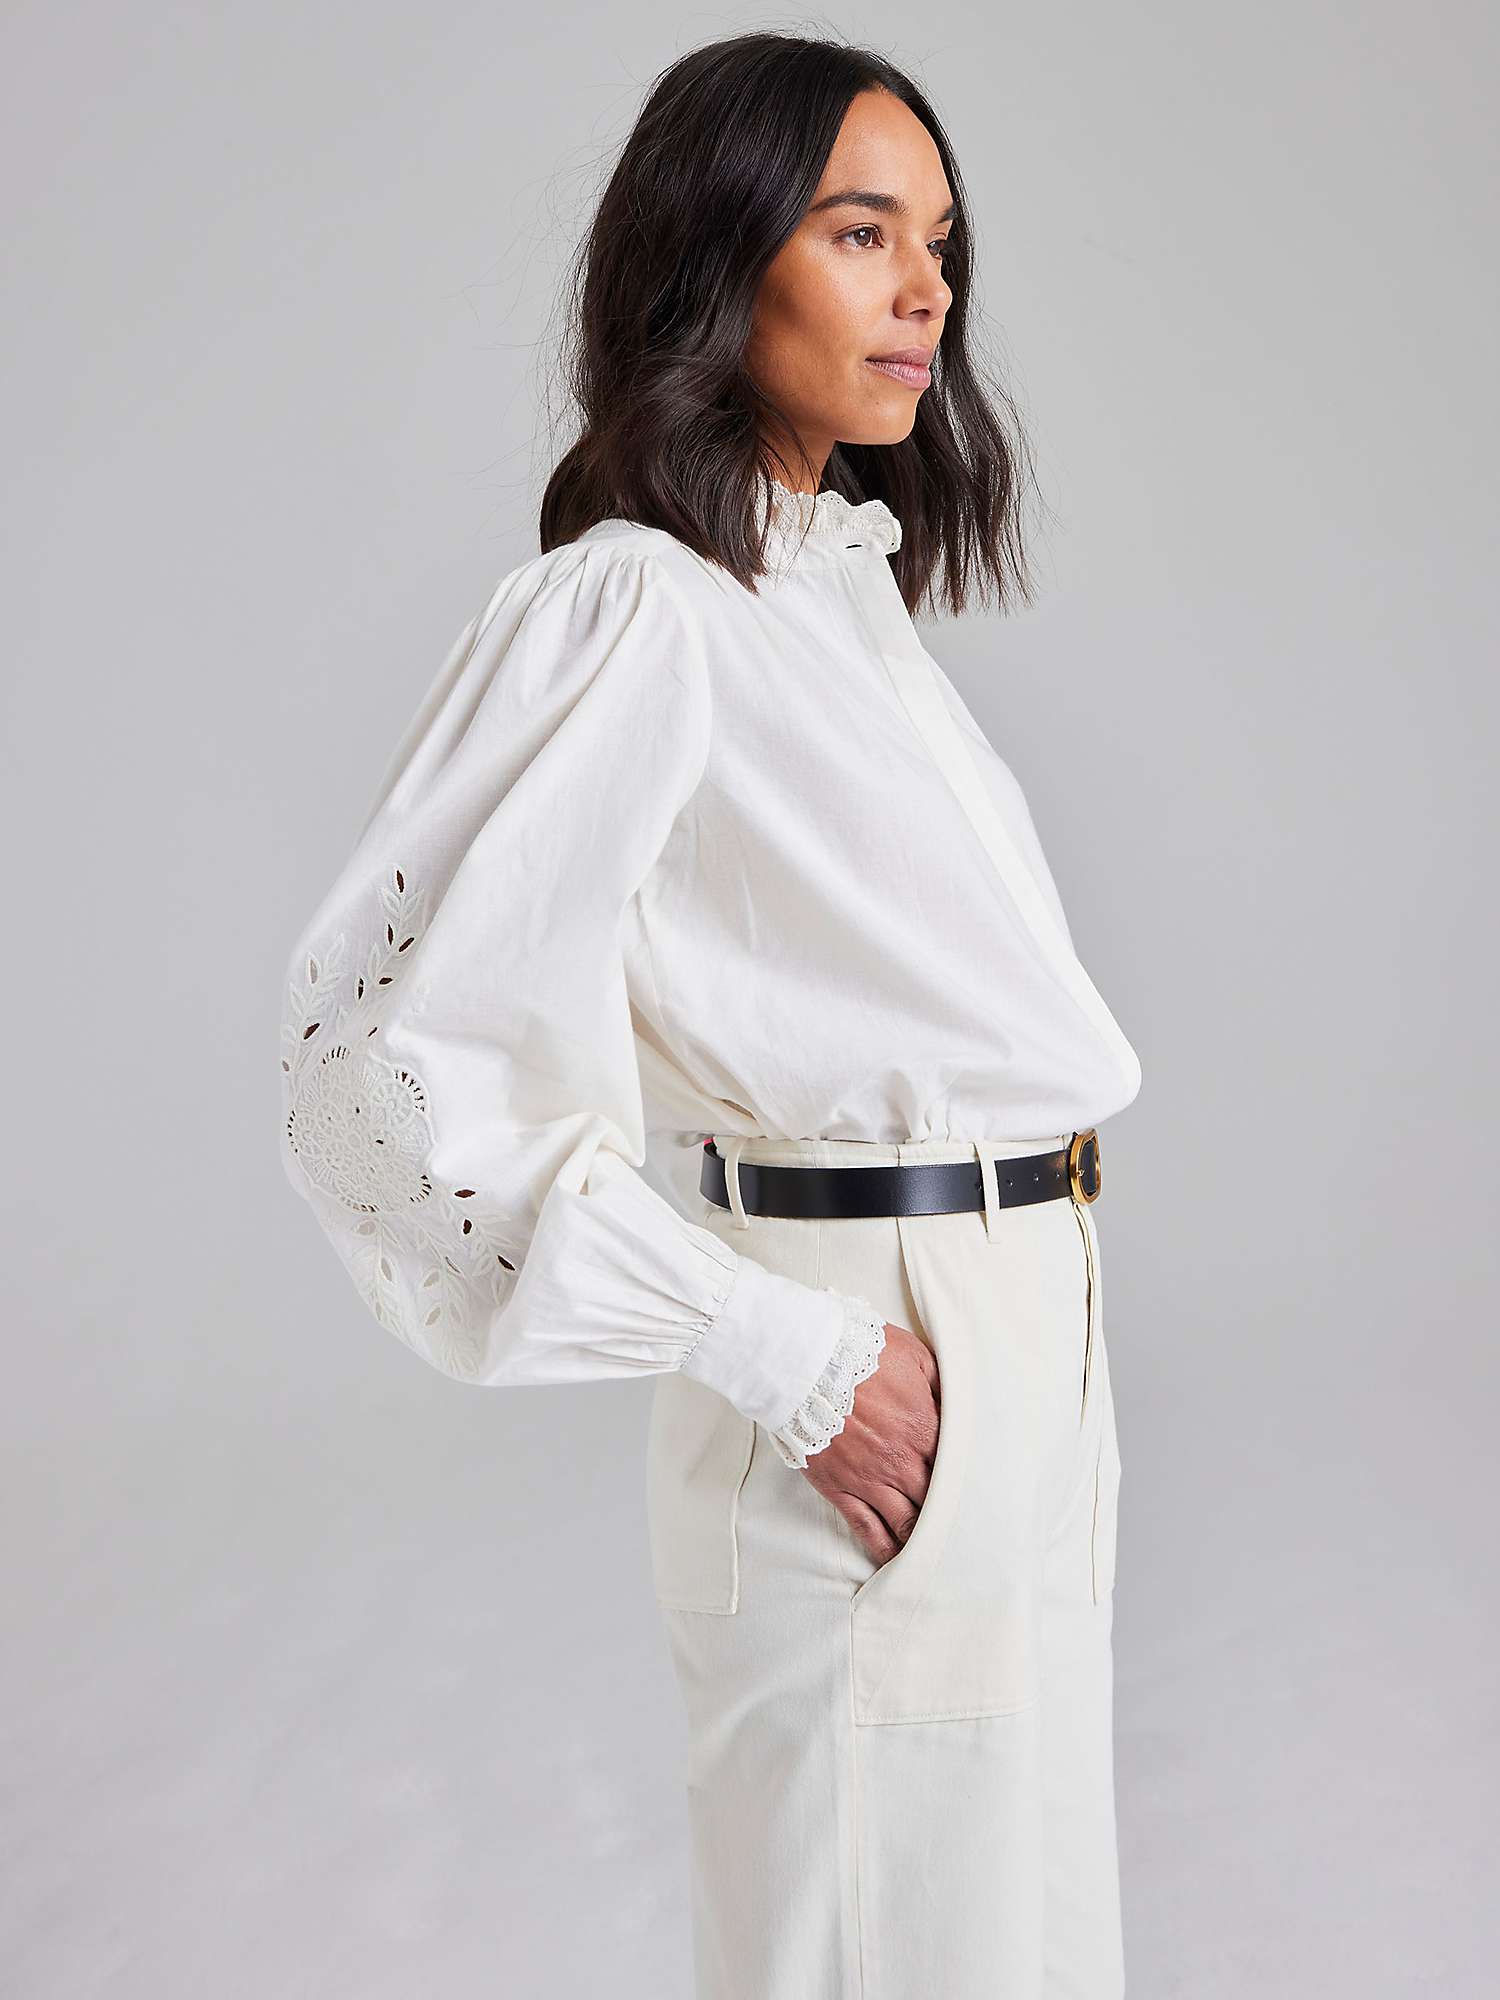 Buy Cape Cove Embroidered Lace Trim Cotton Blouse, White Online at johnlewis.com